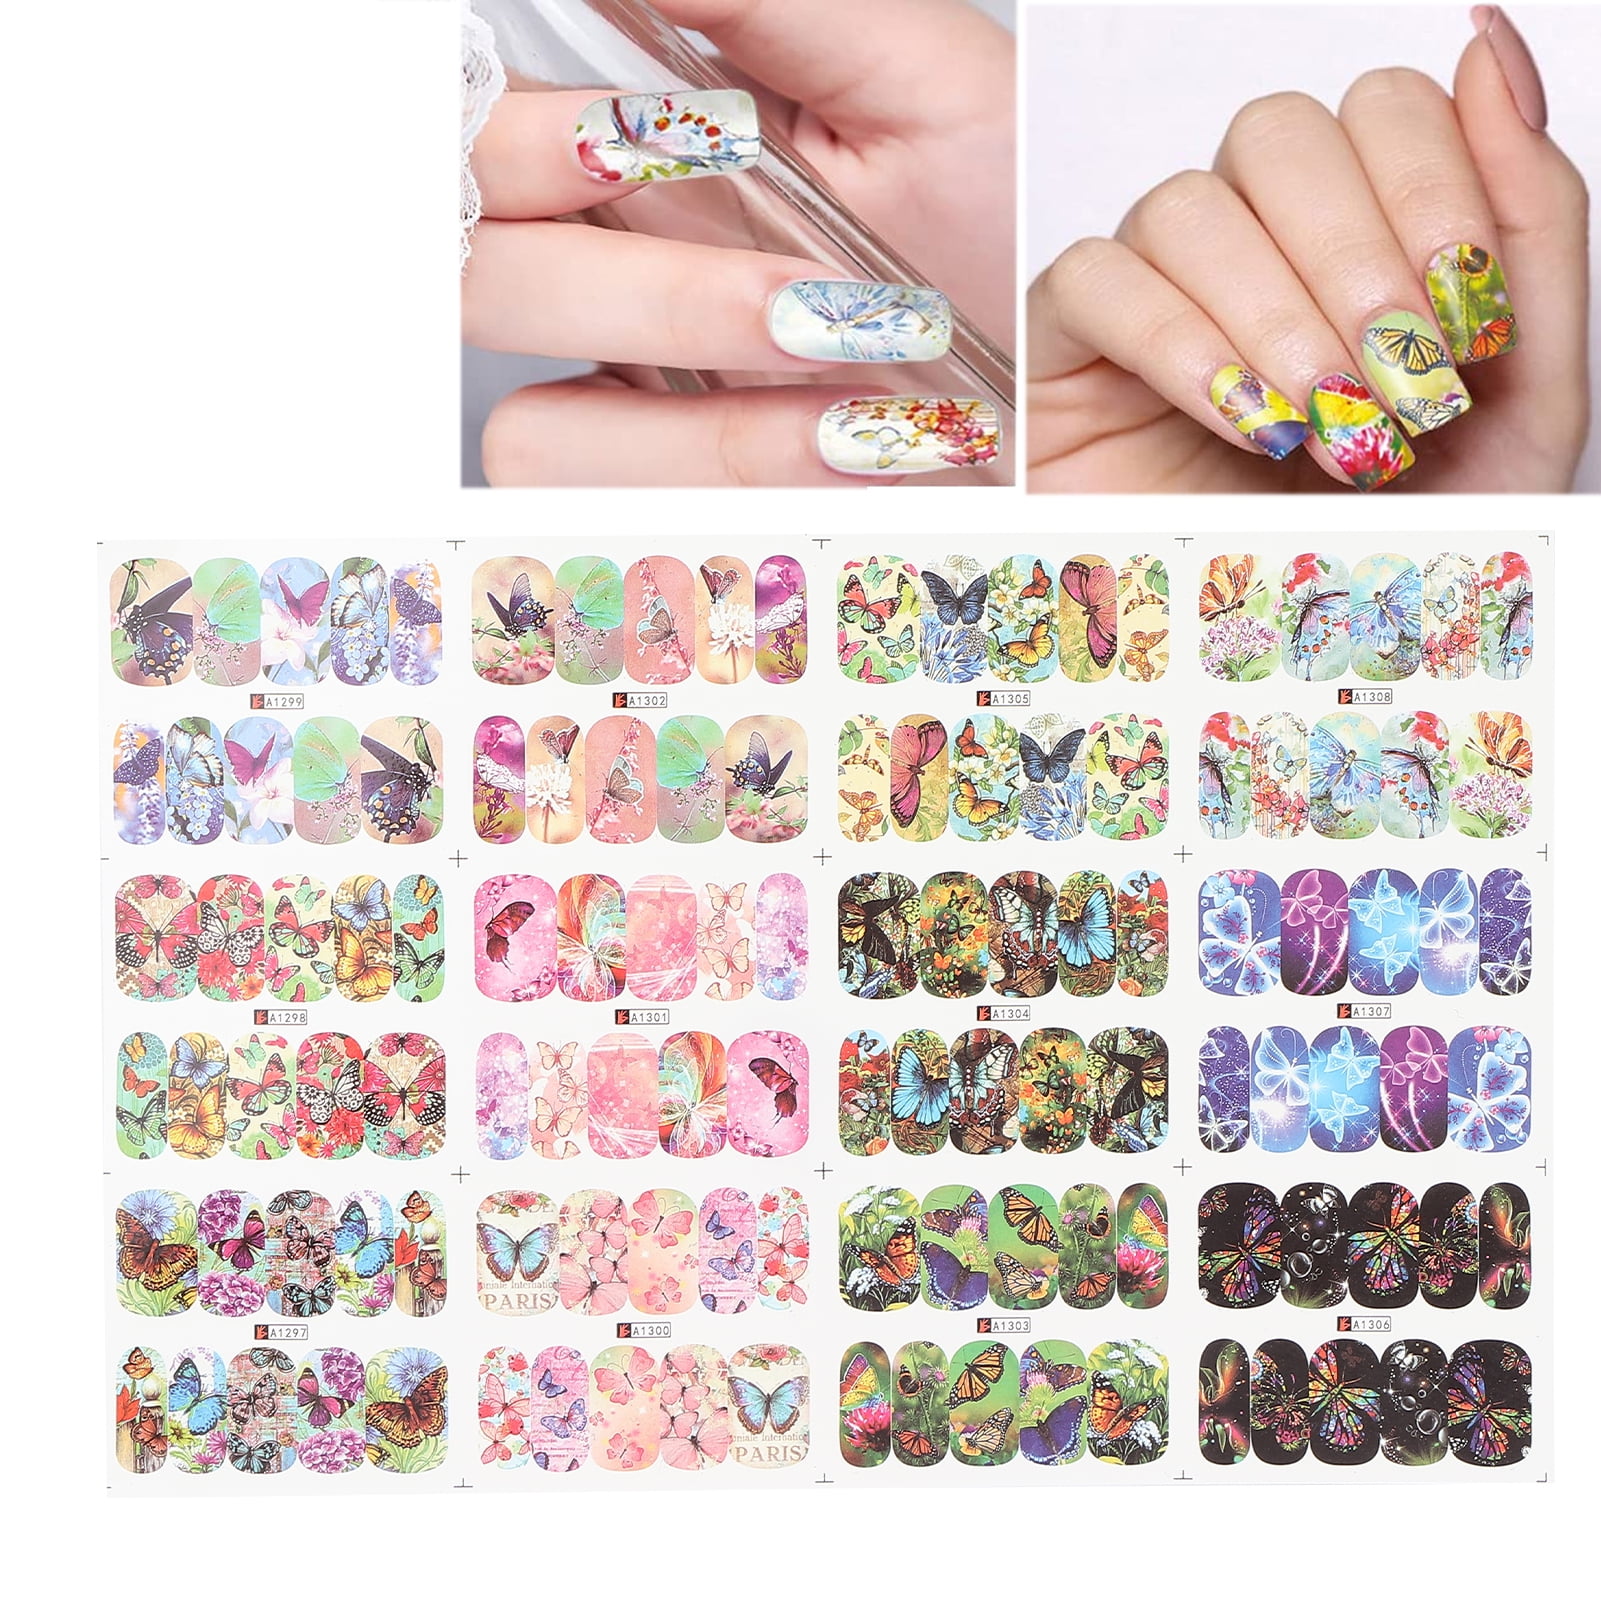 5D Nail Decals Portable Safe Embossed Nail Stickers Self Adhesive Exquisite  7606665172217  eBay